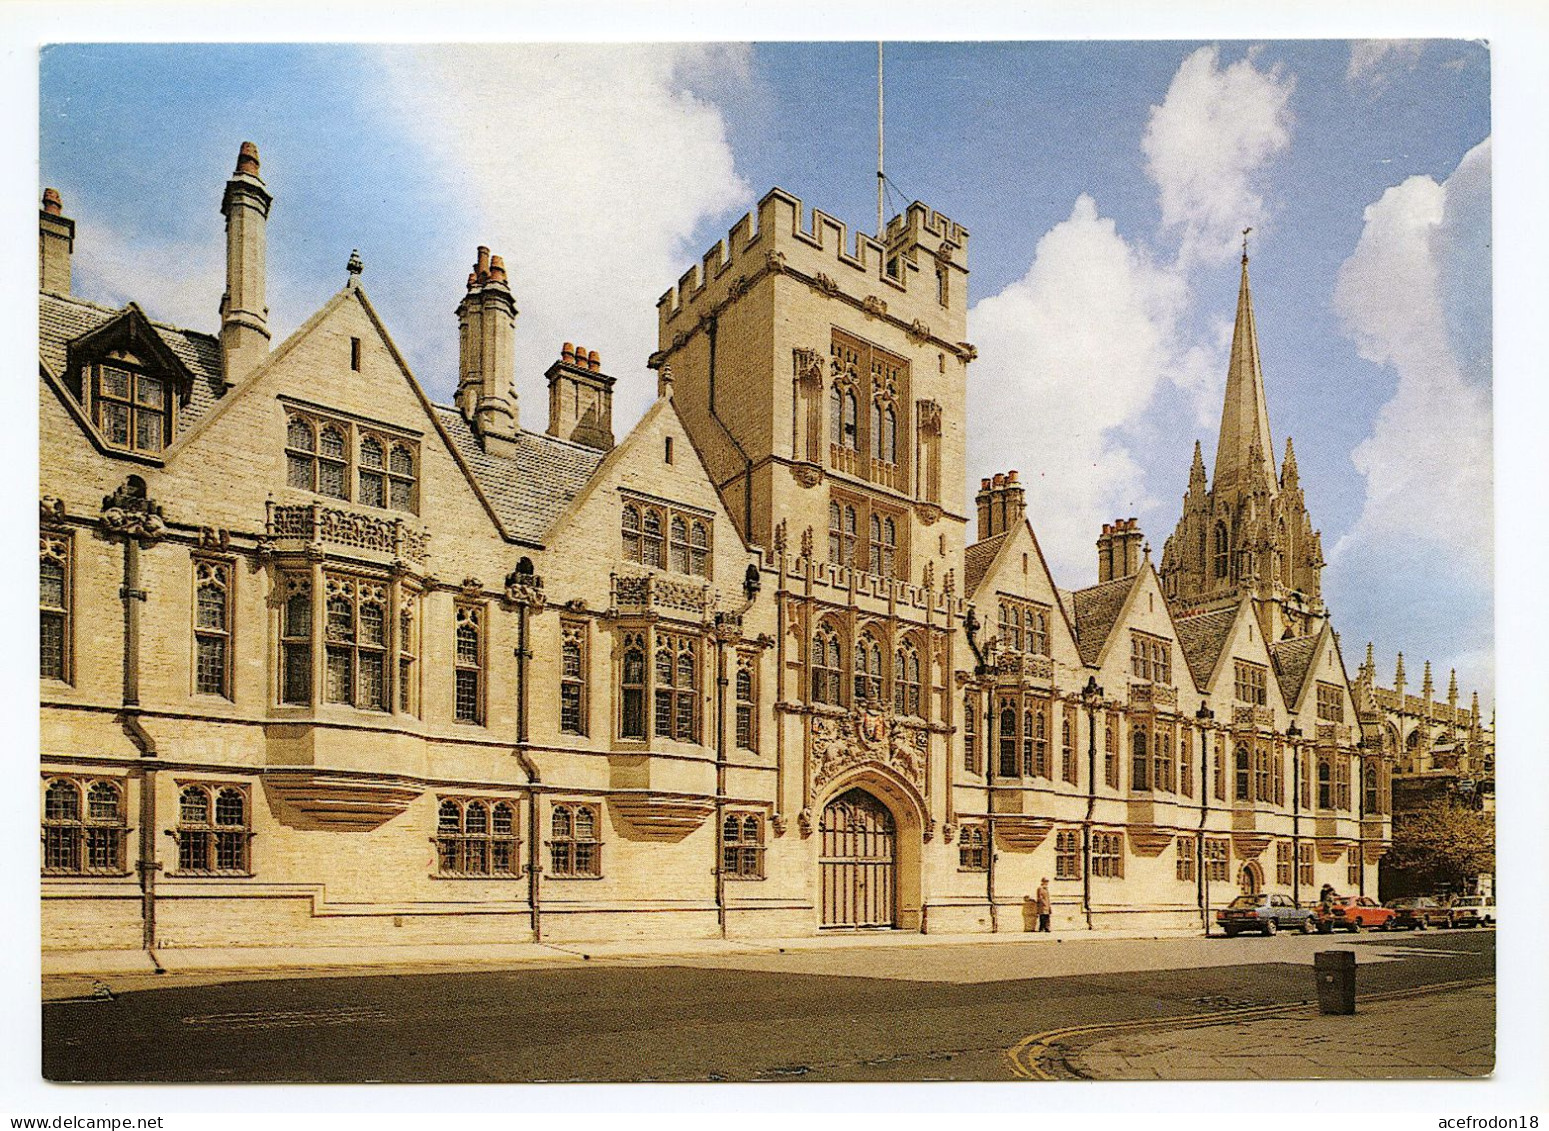 OXFORD - Brasenose College - High St. Frontage - Oxford